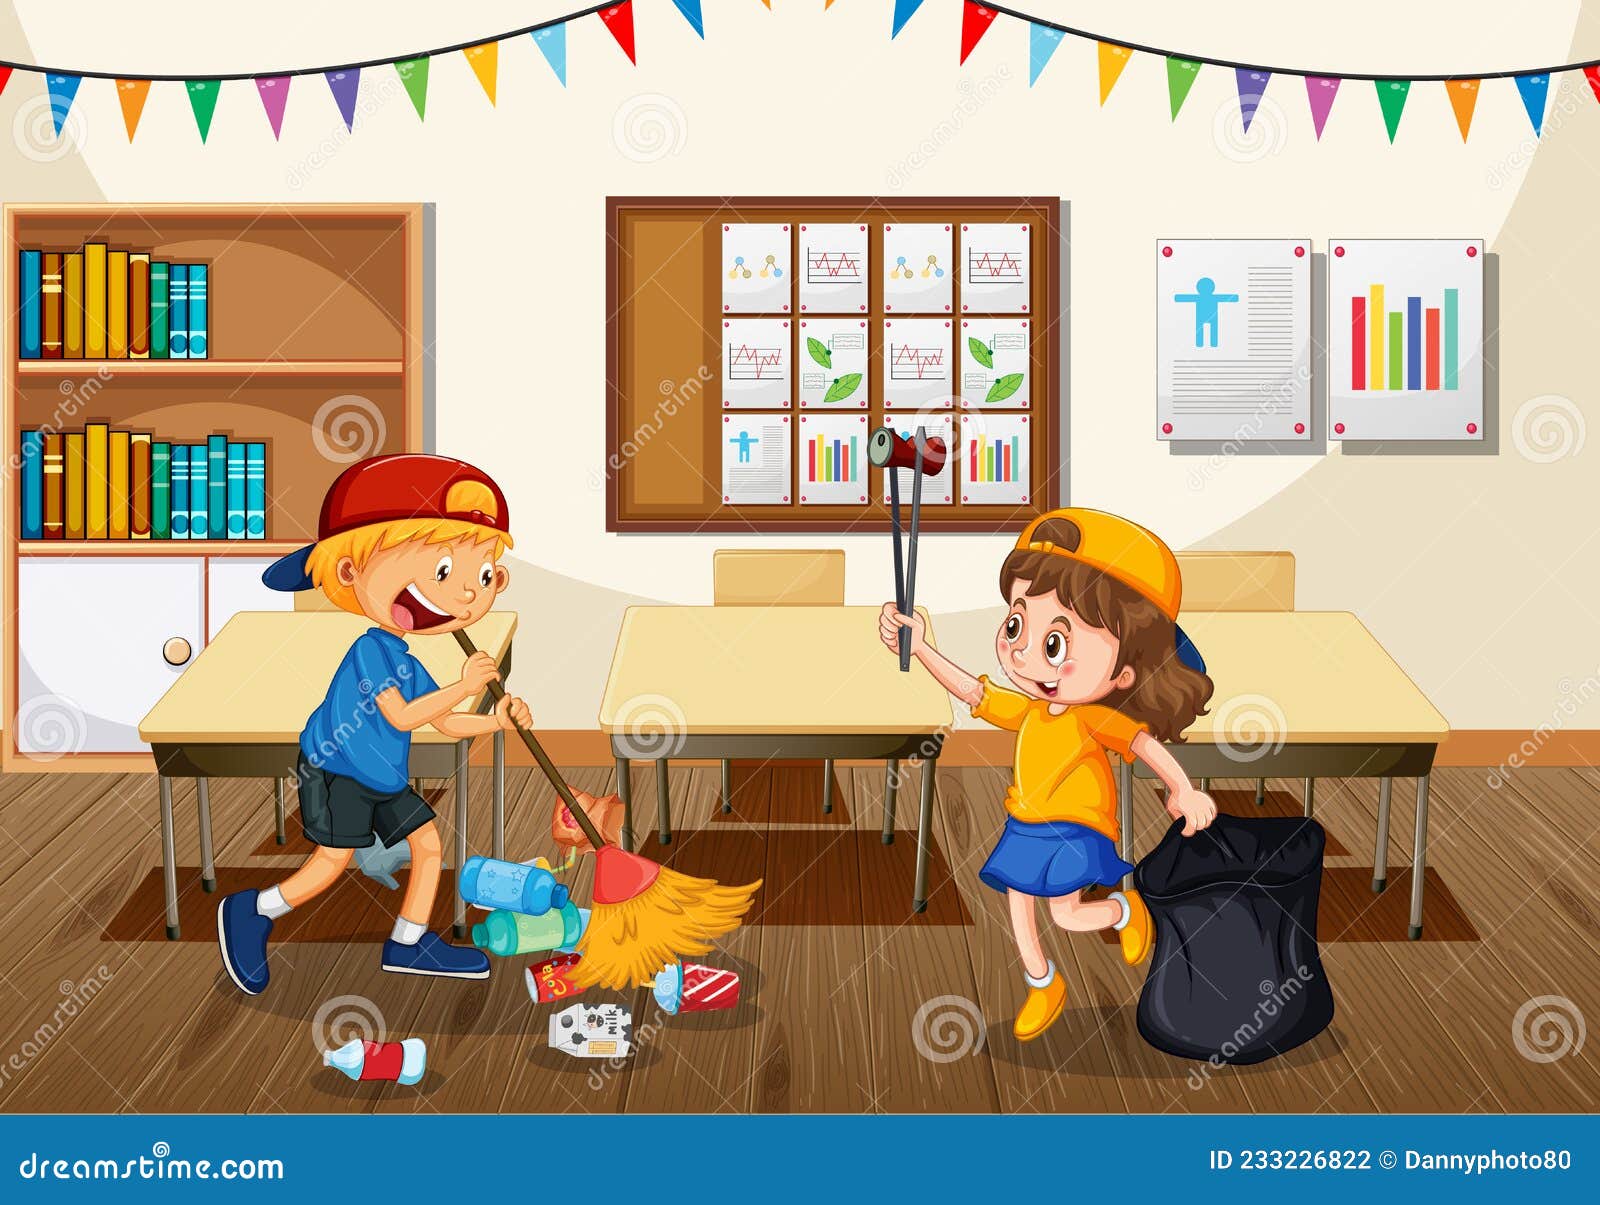 Classroom Cleaning Stock Illustrations – 165 Classroom Cleaning Stock  Illustrations, Vectors & Clipart - Dreamstime